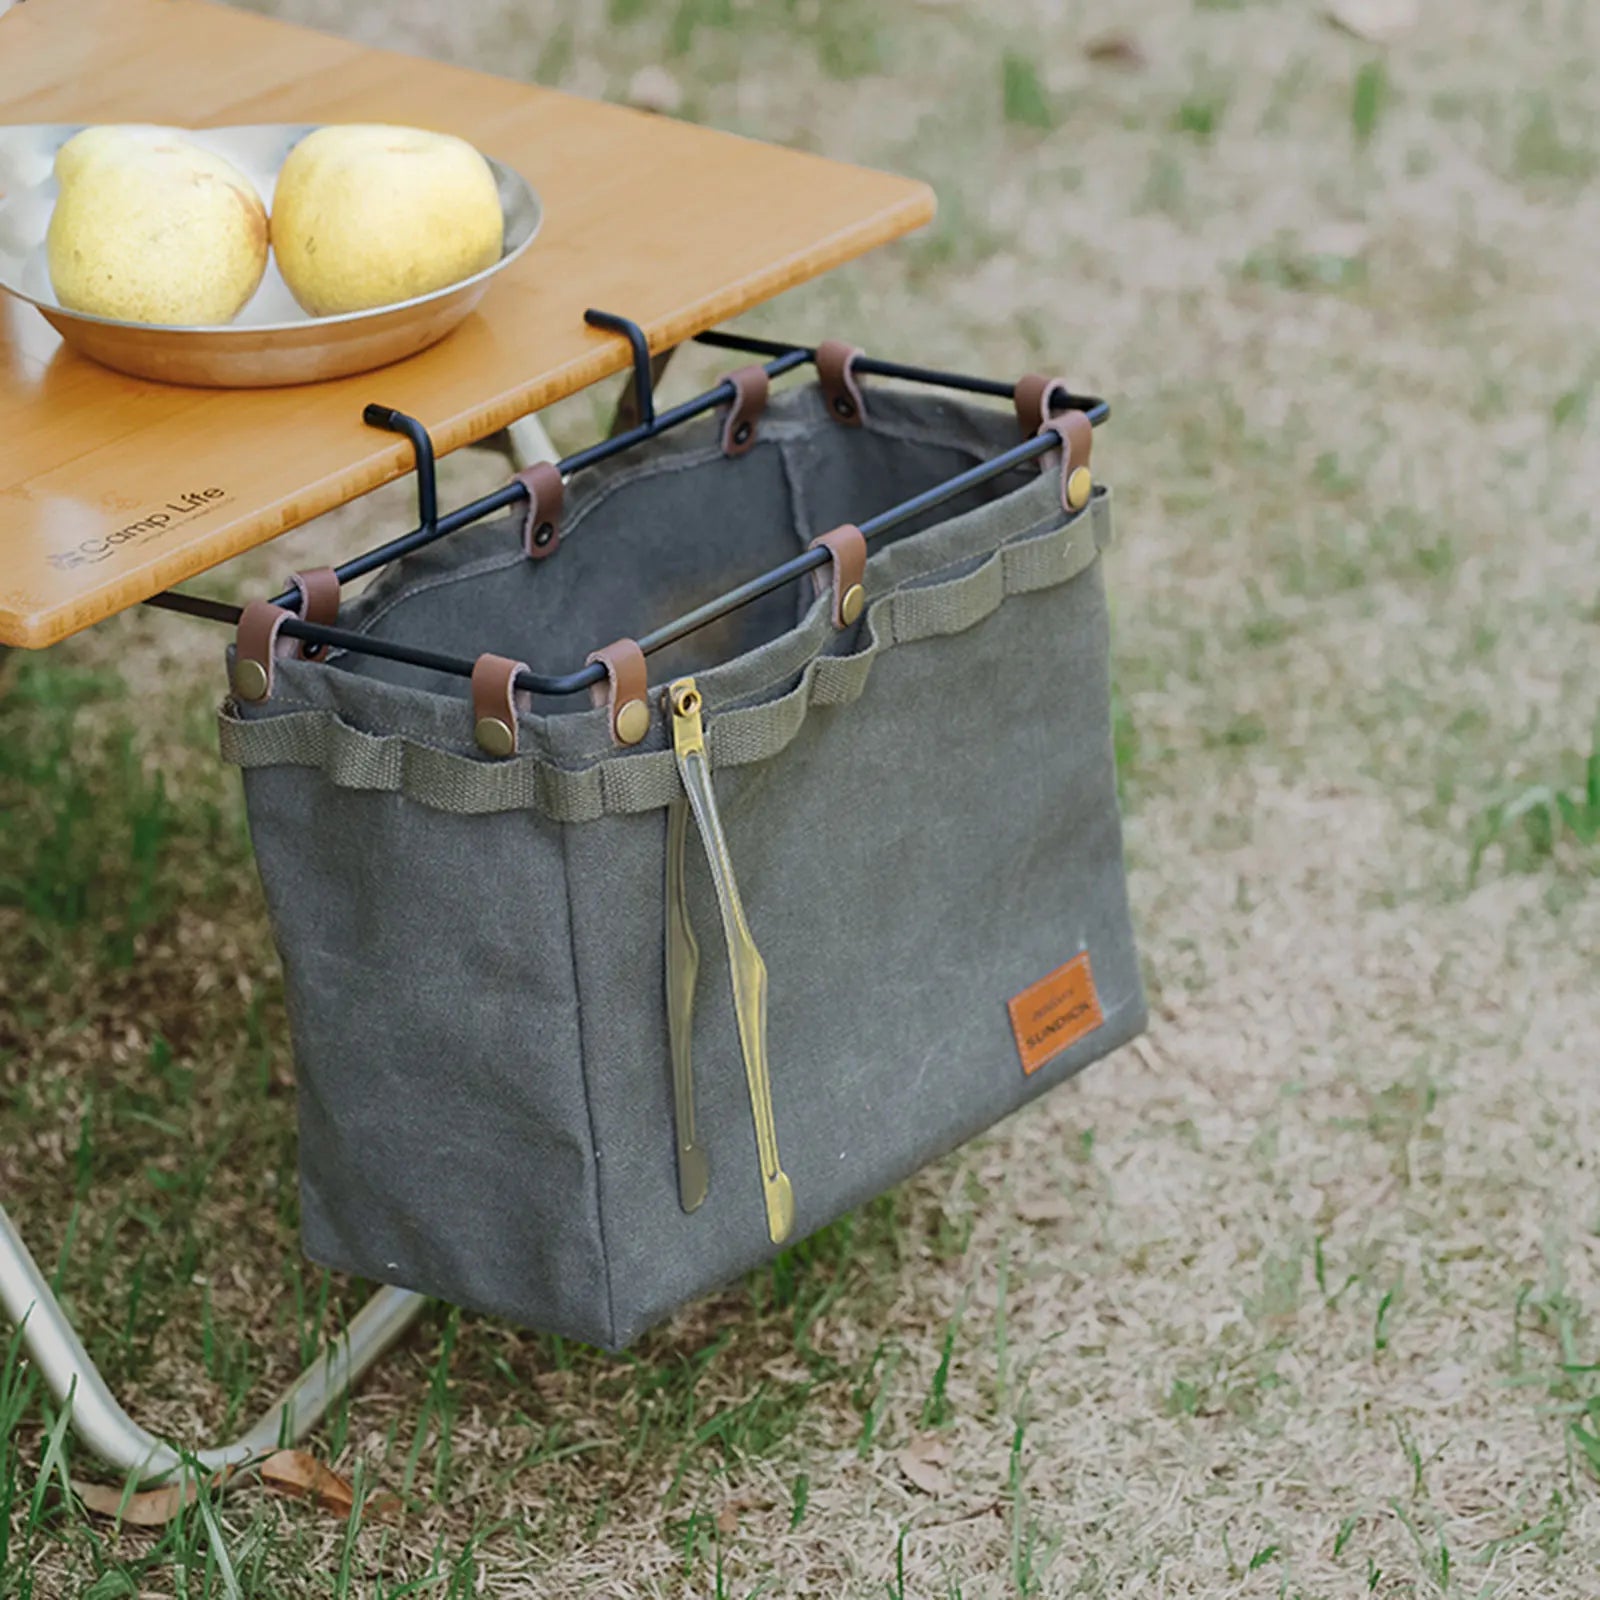 Outdoor Camping Table Side Storage Bag: Multifunctional Folding Canvas Bag with Hook for Picnic Desk Cookware Organization